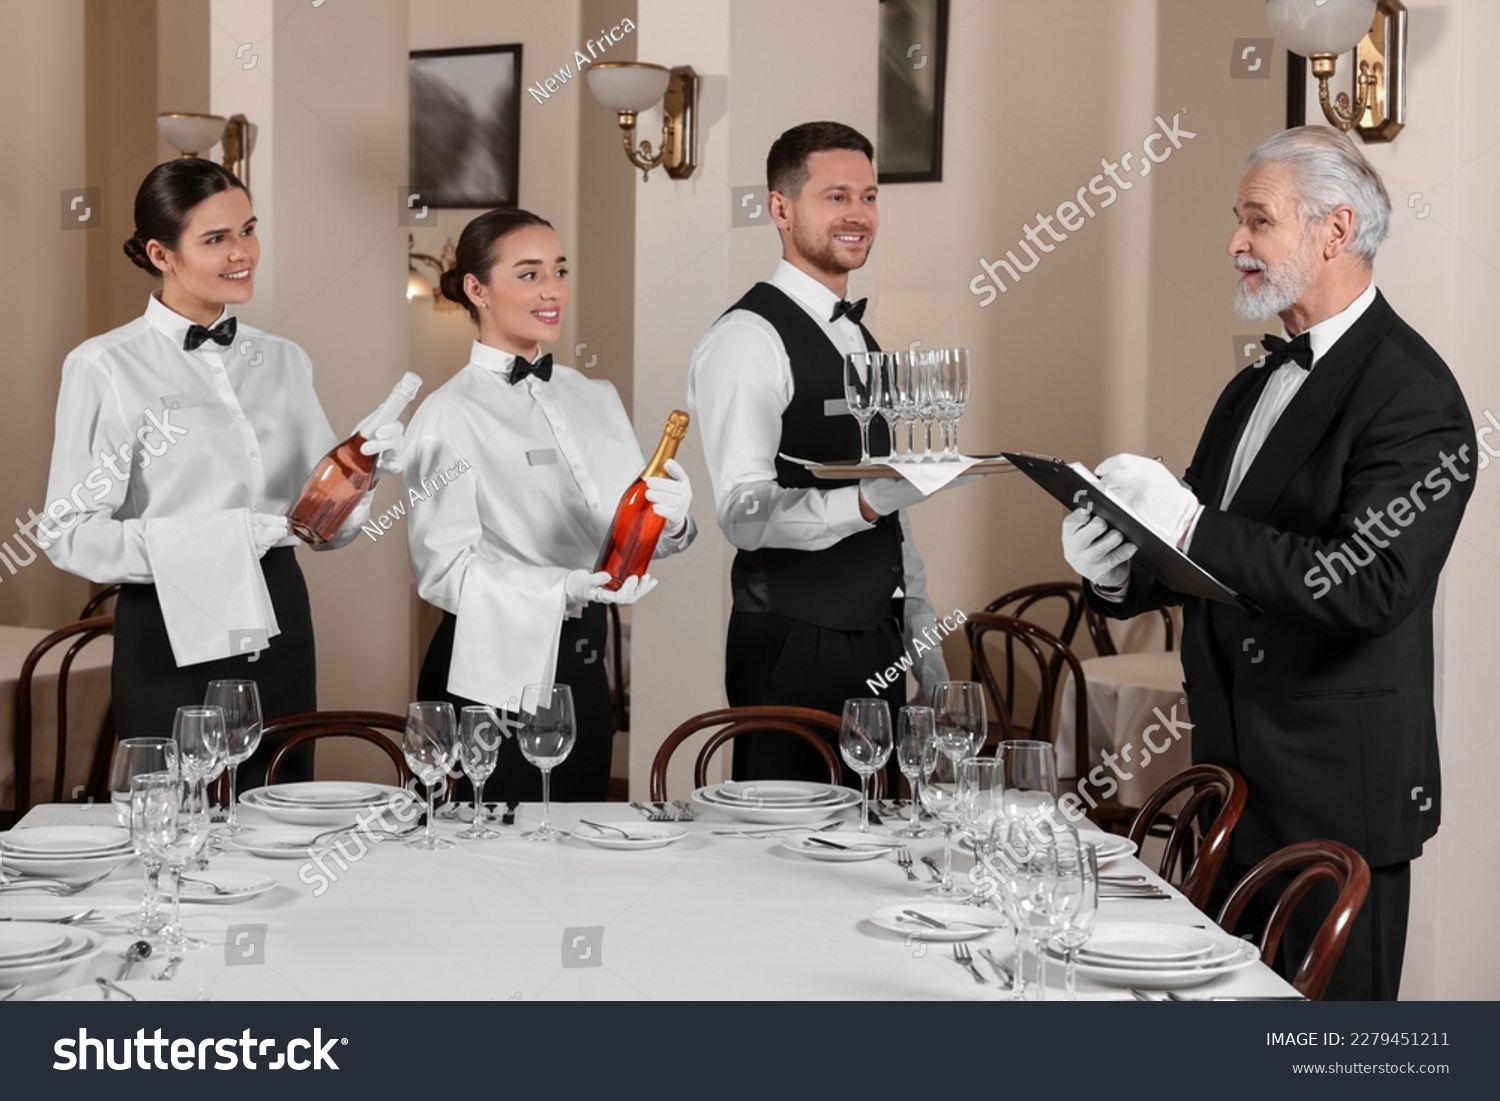 Senior man wearing formal suit teaching trainees in restaurant. Professional butler courses #2279451211